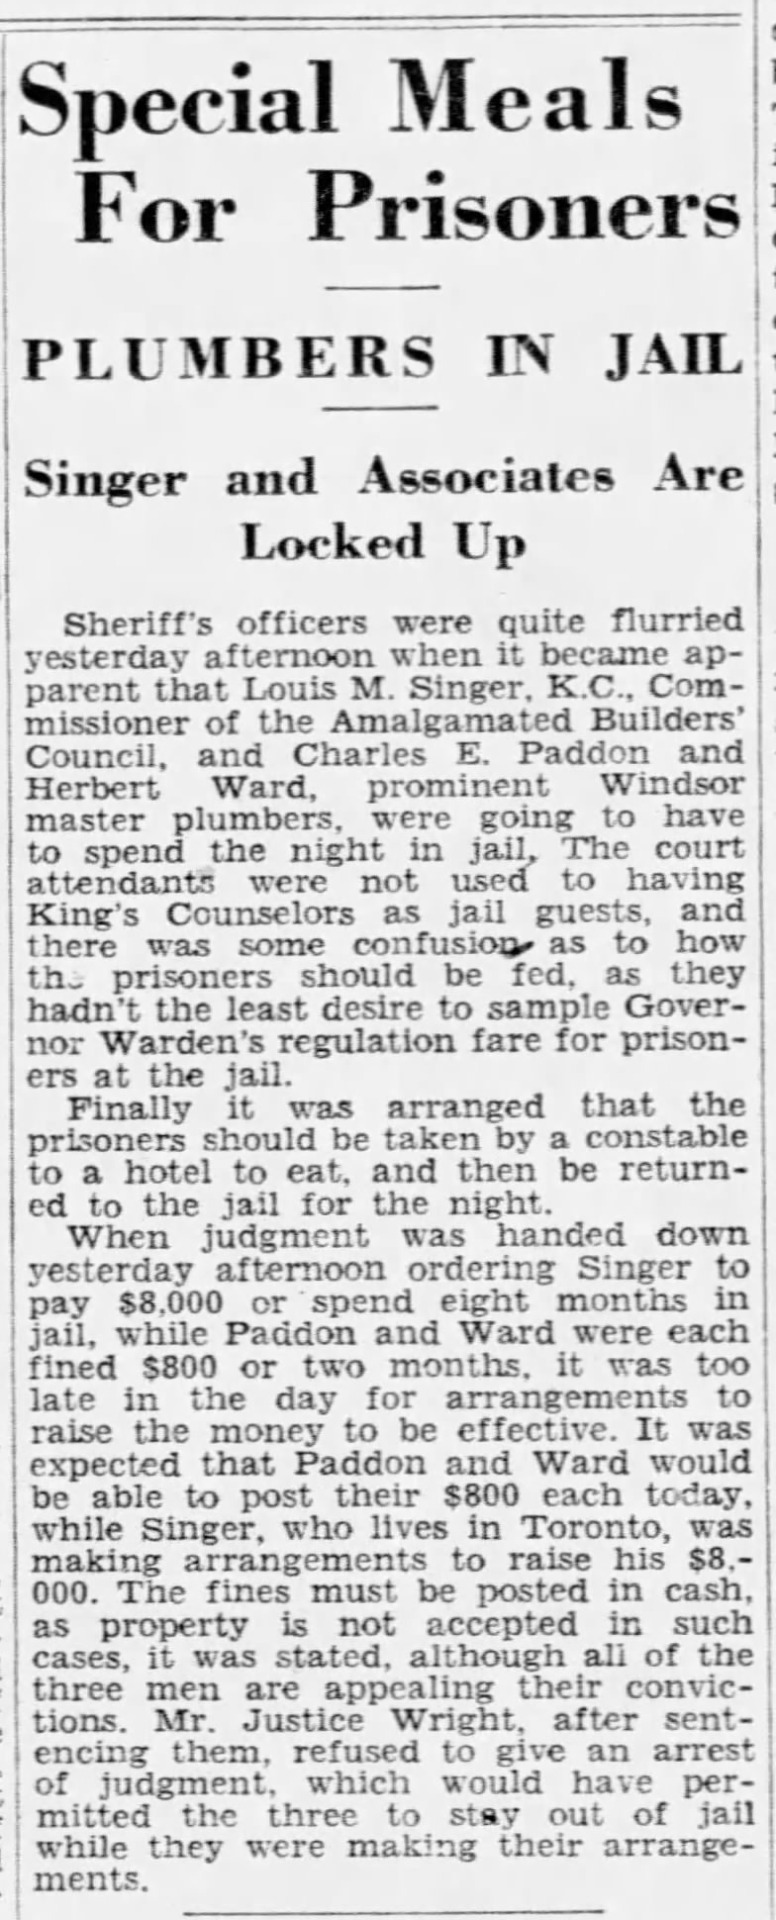 “Special Meals For Prisoners,” Border Cities Star. March 24, 1931. Page 3.
---
PLUMBERS IN JAIL
---
Singer and Associates Are Locked Up
----
Sheriff’s officers were quite flurried yesterday afternoon when it became apparent that Louis M. Singer, K.C., Commissioner of the Amalgamated Builders’ Council, and Charles E. Paddon and Herbert Ward, prominent Windsor master plumbers, were going to have to spend the night in jail. The court attendants were not used to having King’s Counselors as jail guests and there as some confusion as to how the prisoners should be fed, as they hadn’t the least desire to sample Governor Warden’s regulation fare for prisoners at the jail.Finally it was arranged that the prisoners should be taken by a constable to a hotel to eat, and then be returned to the jail for the night.When judgement was handed down yesterday afternoon ordering Singer to pay $8,000 or spend eight months in jail, while Paddon and Ward were each fined $800 or two months, it was too late in the day for arrangements to raise the money to be effective. It was expected that Paddon and Ward would be able to post tehri $800 each today, while Singer who lives in Toronto, was making arrangements to raise his $8,000, The fines must be posted in cash as property is not accepted in such cases, it was stated, although all of the three men are appealing their convictions. Mr. Justice Wright after sentencing them, refuse to give an arrest of judgement, which would have permitted the three to stay out of jail while they were making their arrangements. #windsor #essex county jail #remand prisoners #fines and costs #master plumbers #amalgamated builders council #building trades#strike#illegal strike#plumbers#construction workers#strikebreaking #great depression in canada  #crime and punishment in canada  #history of crime and punishment in canada